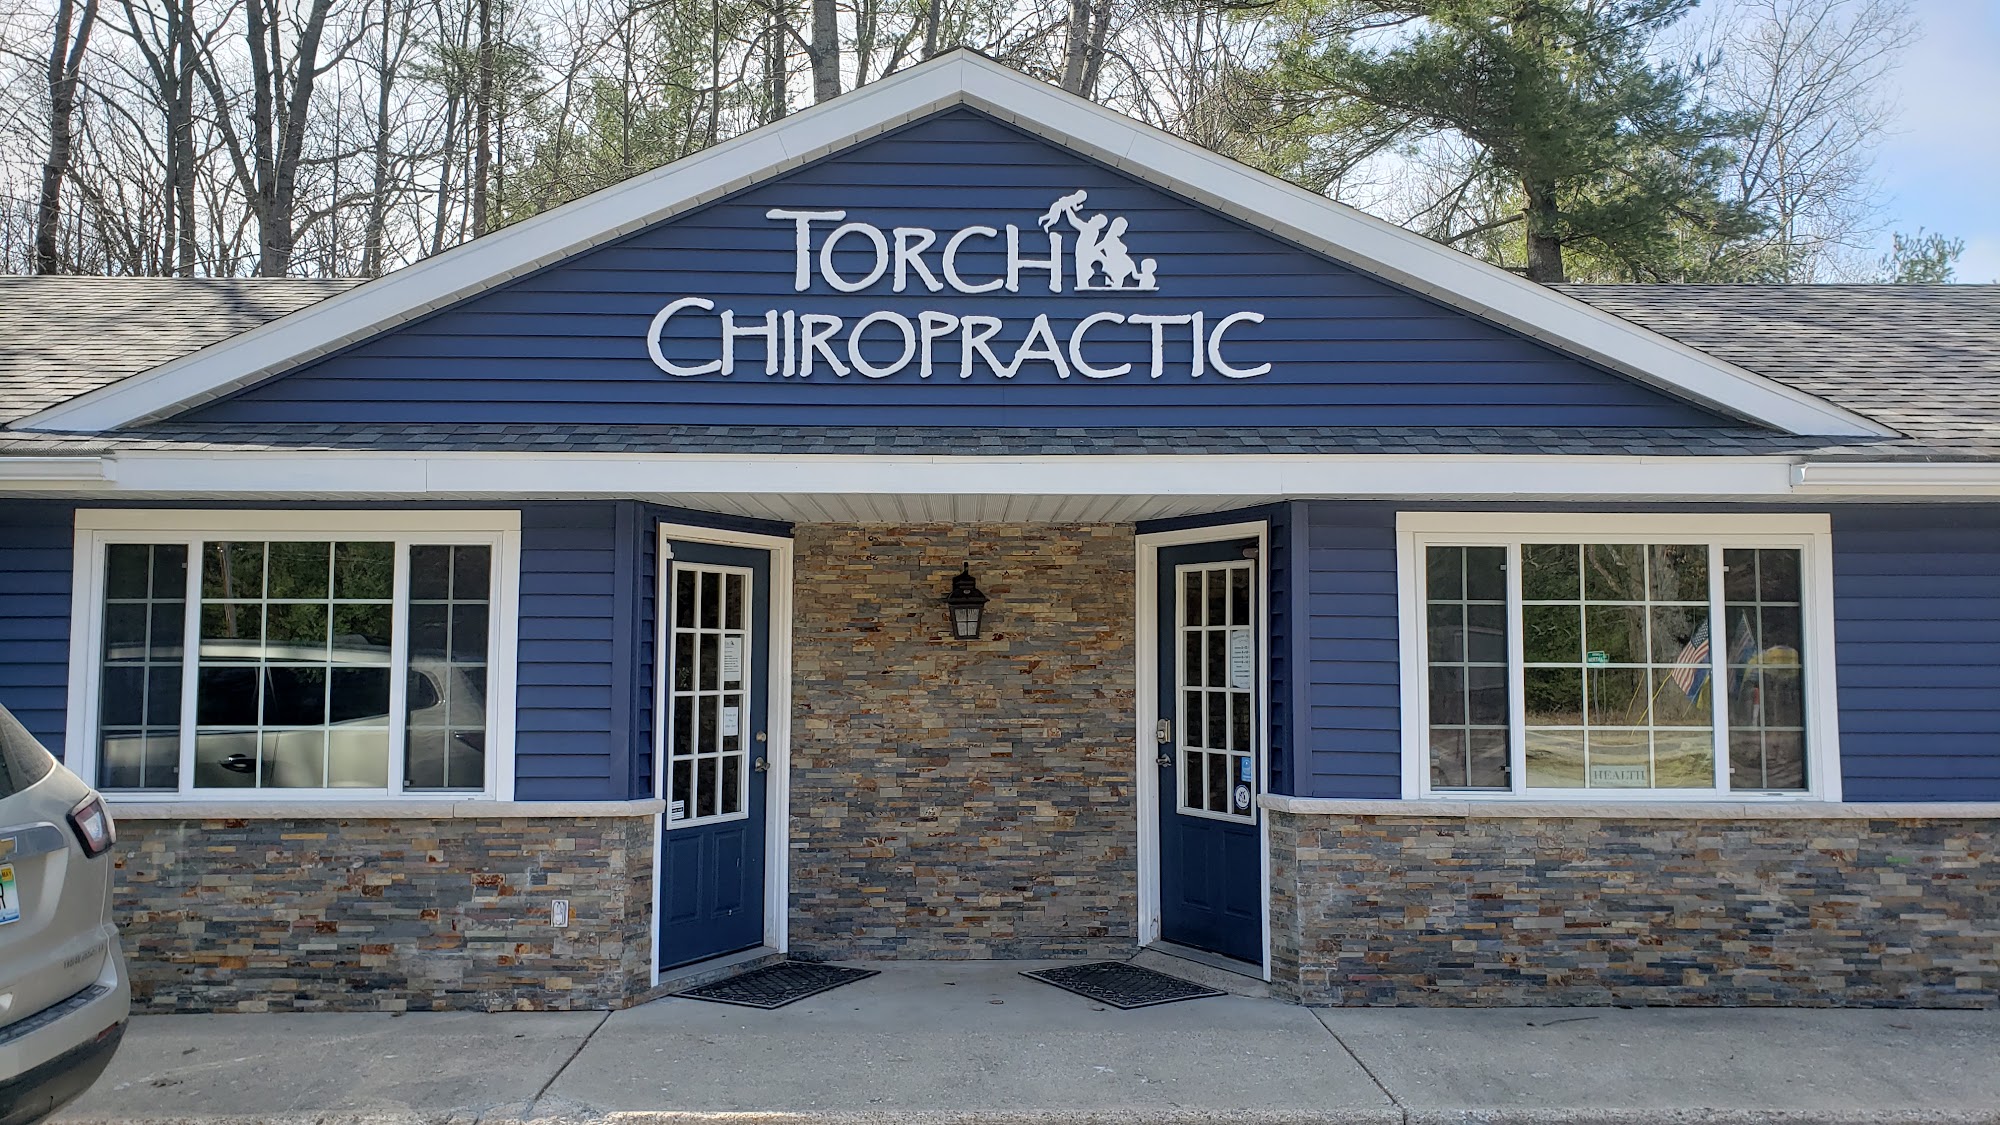 Torch Chiropractic Family Wellness Center 9995 Rapid City Rd NW, Rapid City Michigan 49676